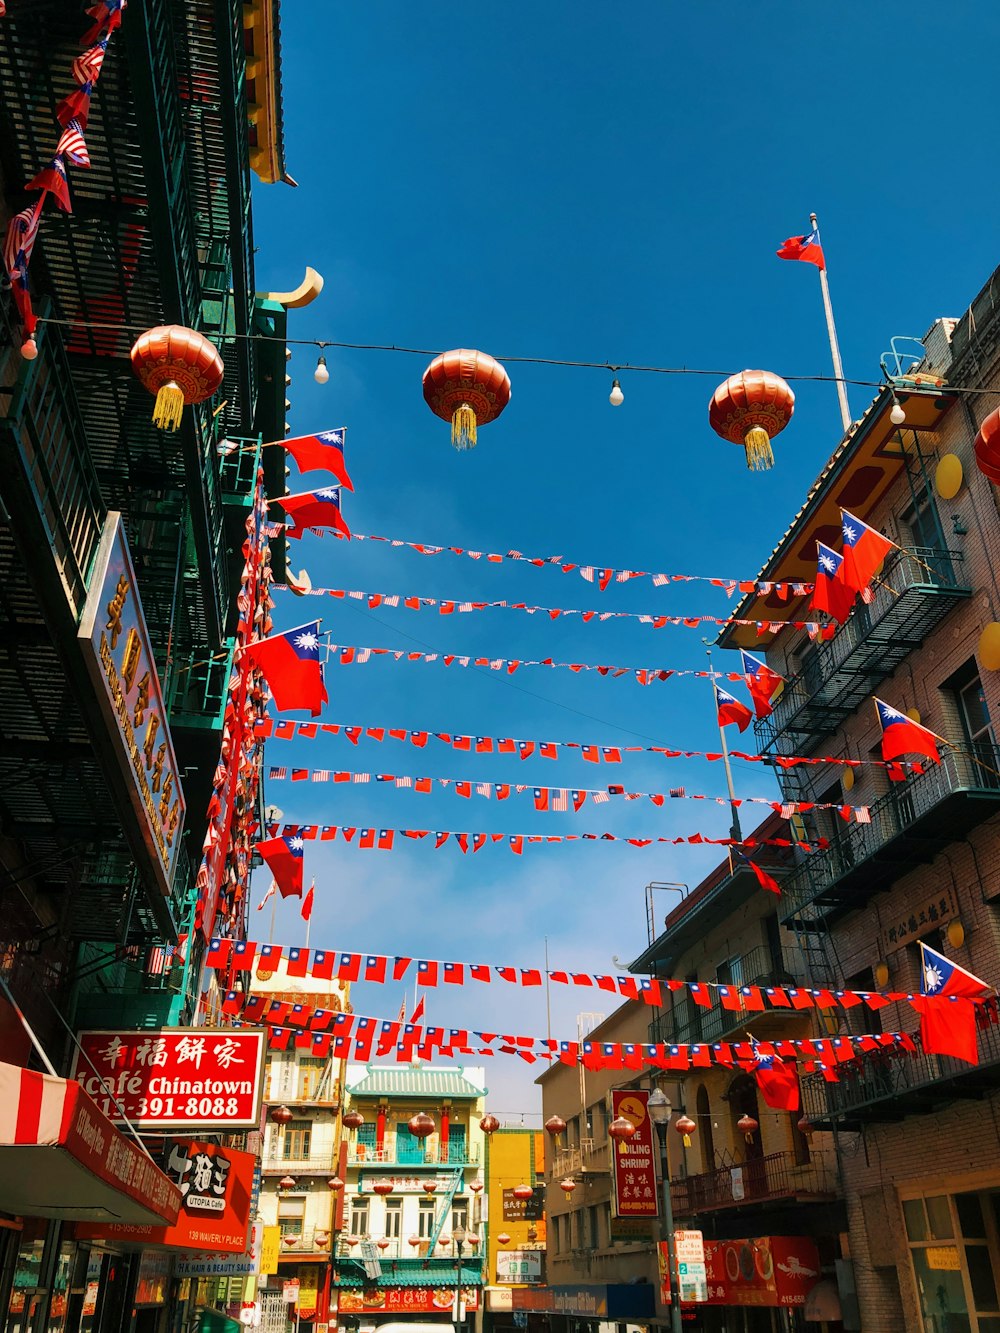 red Chinese hanging decor in between buildings during daytime